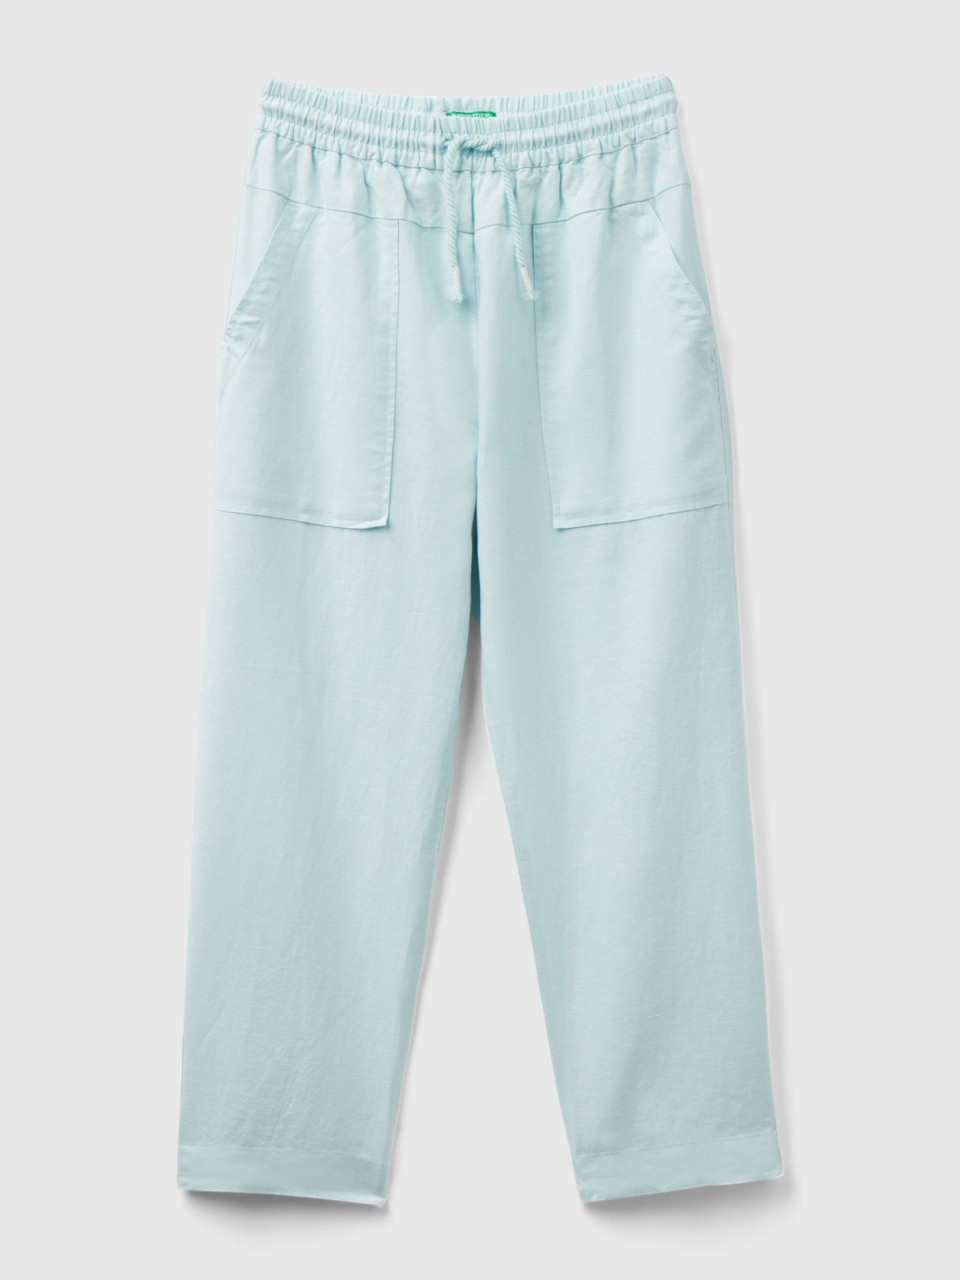 Benetton, Trousers In Linen Blend With Drawstring, Aqua, Kids